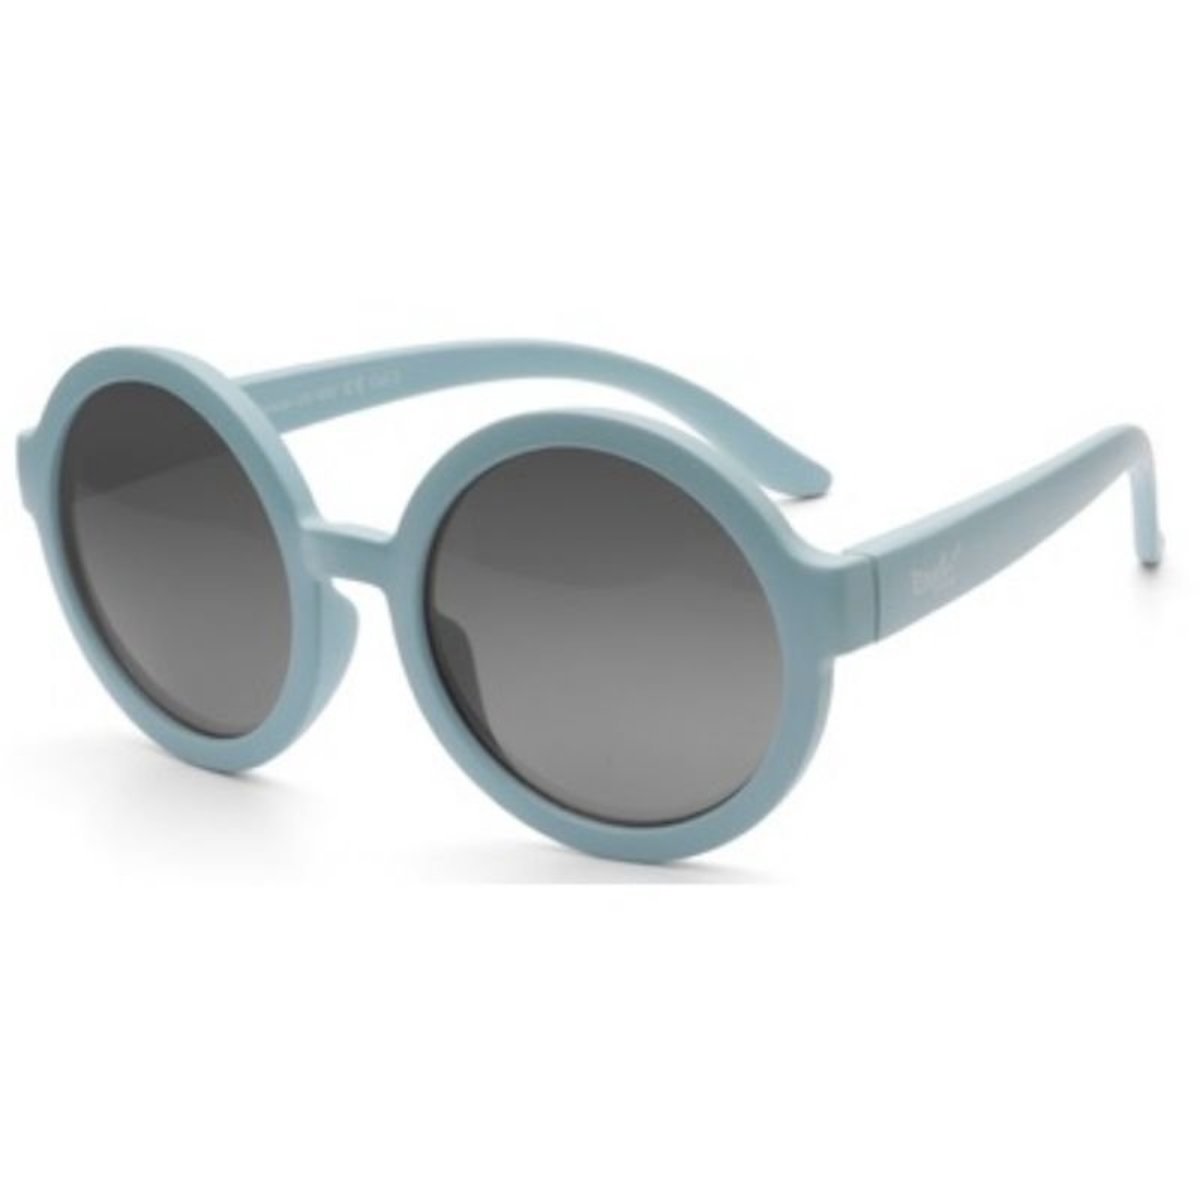 Real Shades - UV-zonnebril voor kinderen - Vibe - Mat Cool Blauw - maat Onesize (4-6yrs)